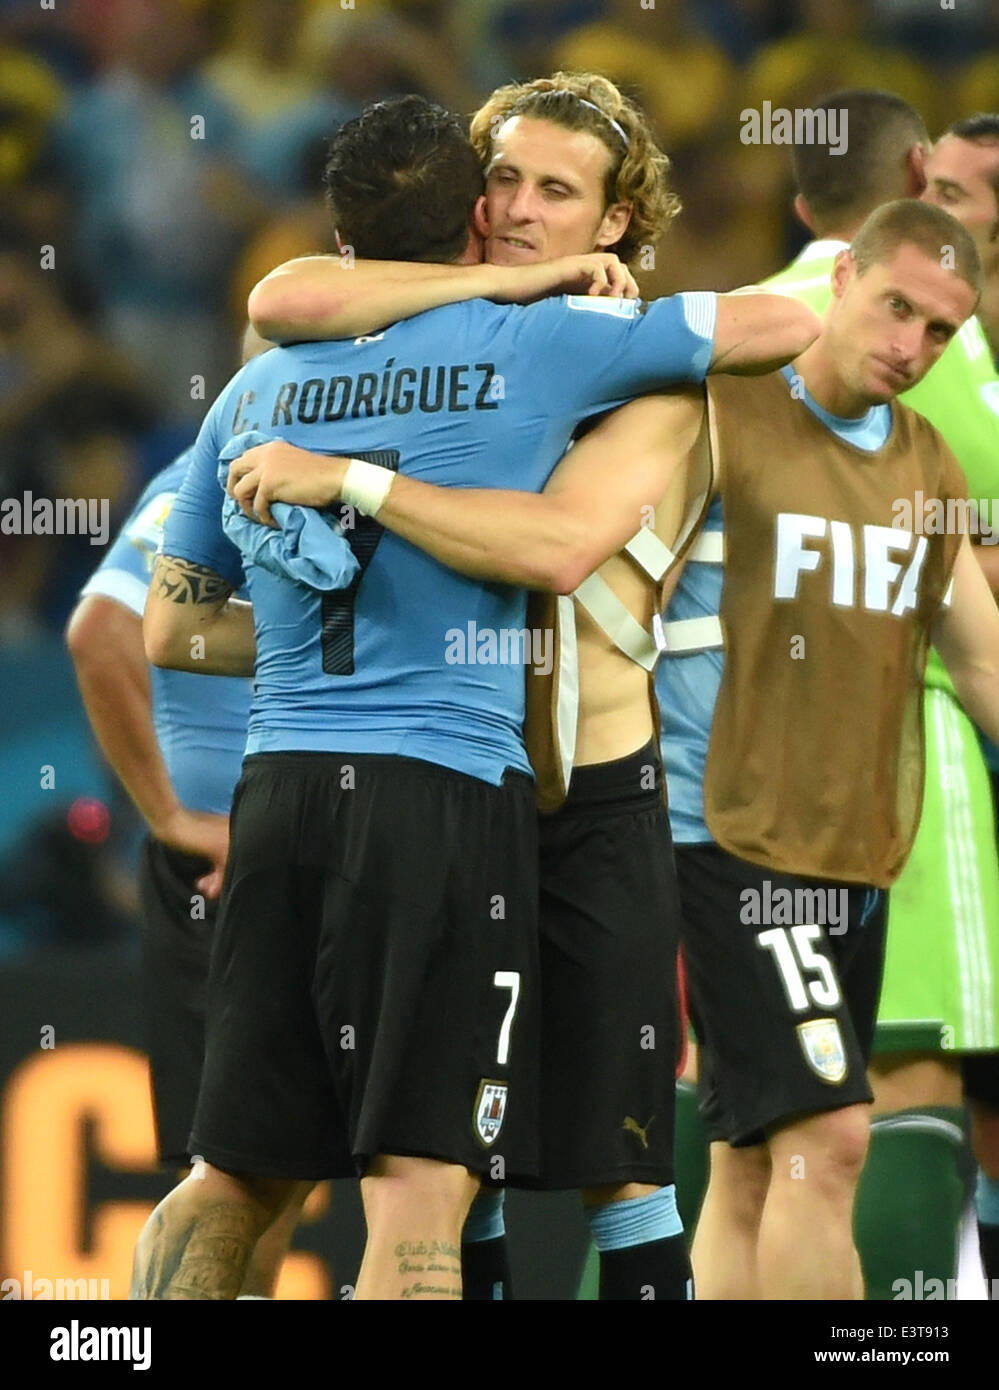 Rio De Janeiro, Brazil. 28th June, 2014. Uruguay's Cristian Rodriguez (No.7) hugs Diego Forlan after a Round of 16 match between Colombia and Uruguay of 2014 FIFA World Cup at the Estadio do Maracana Stadium in Rio de Janeiro, Brazil, on June 28, 2014. Colombia won 2-0 over Uruguay on Saturday. Credit:  Wang Yuguo/Xinhua/Alamy Live News Stock Photo